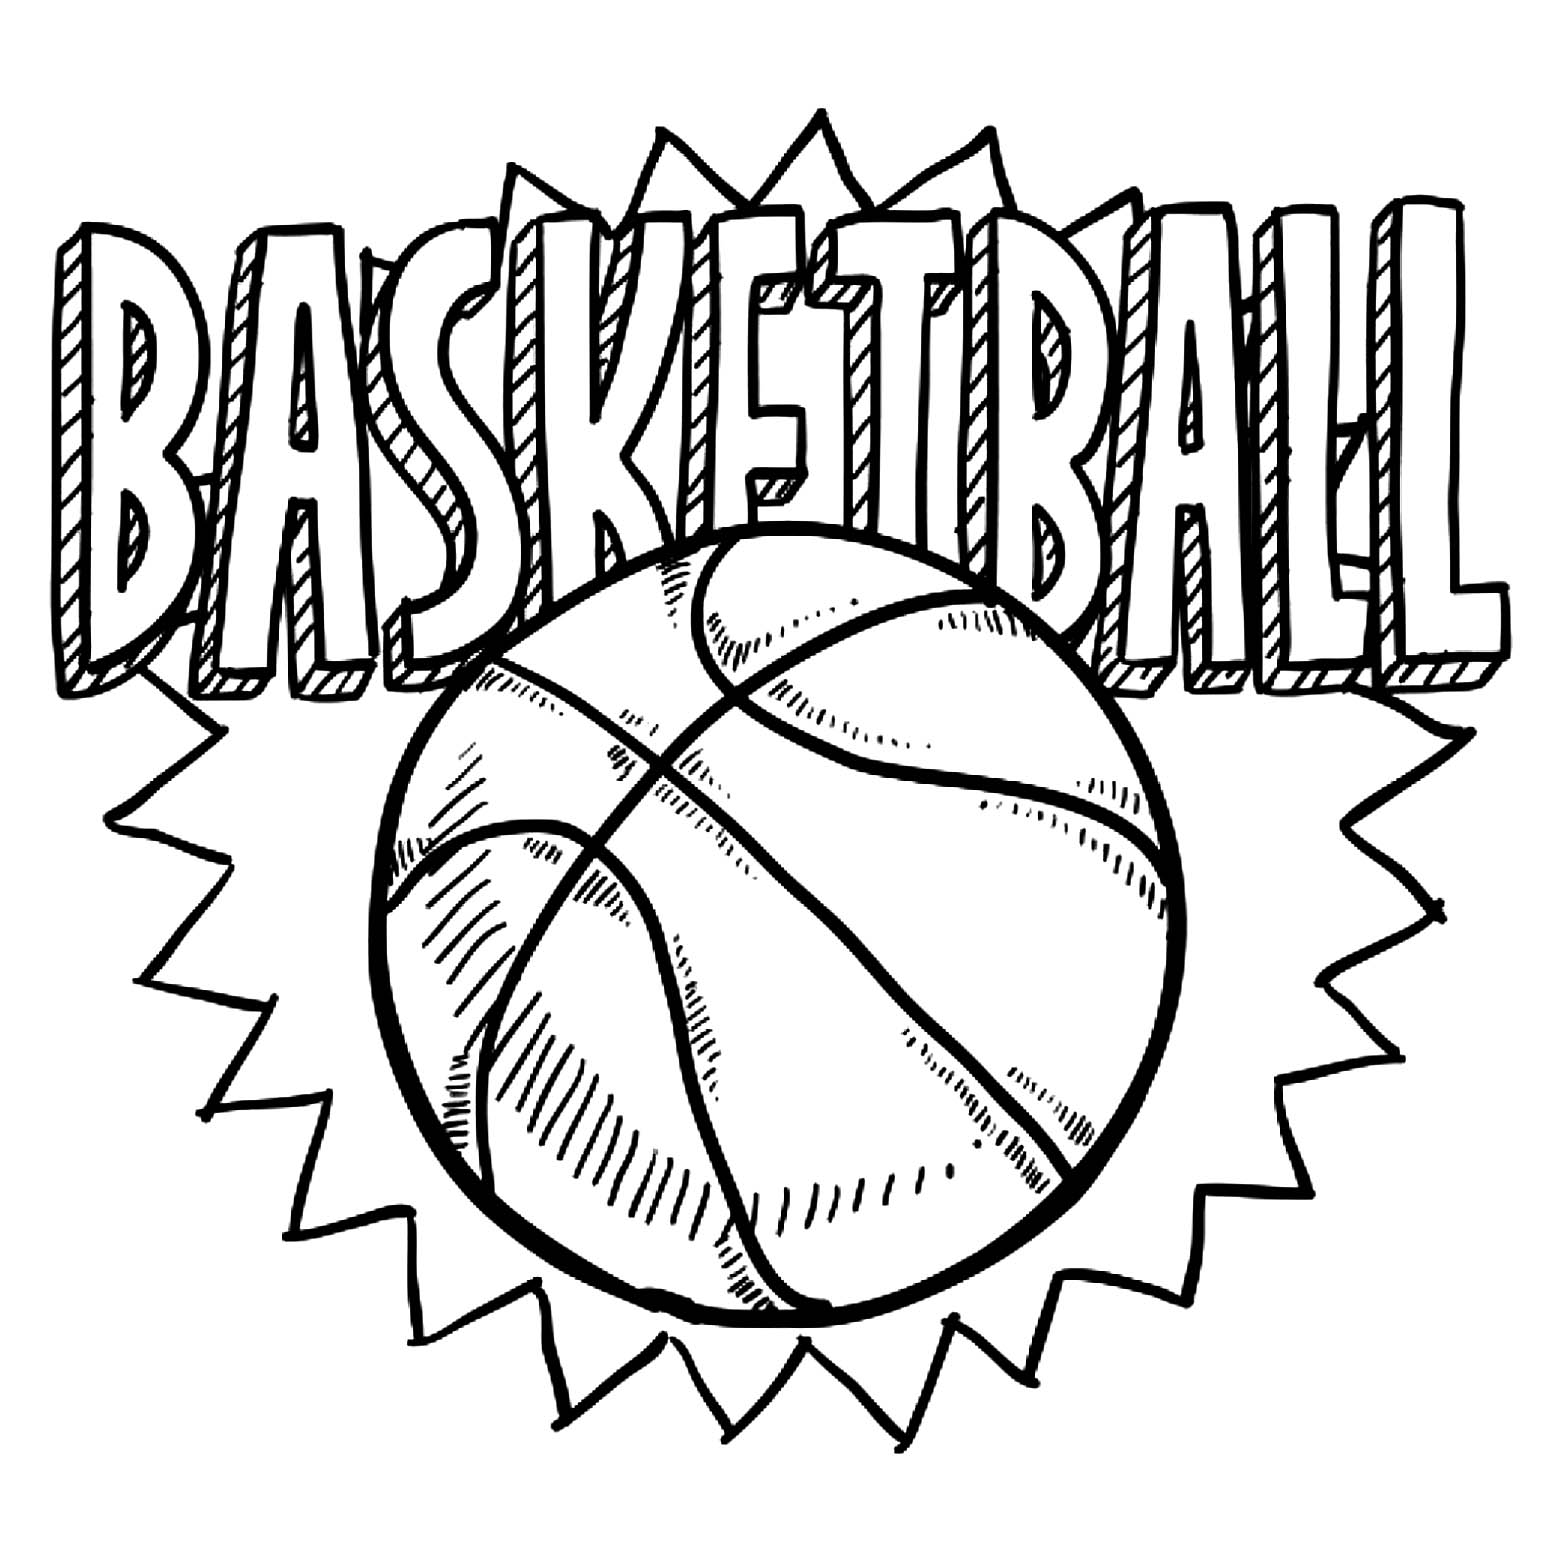 Basketball free to color for children Basketball Kids Coloring Pages